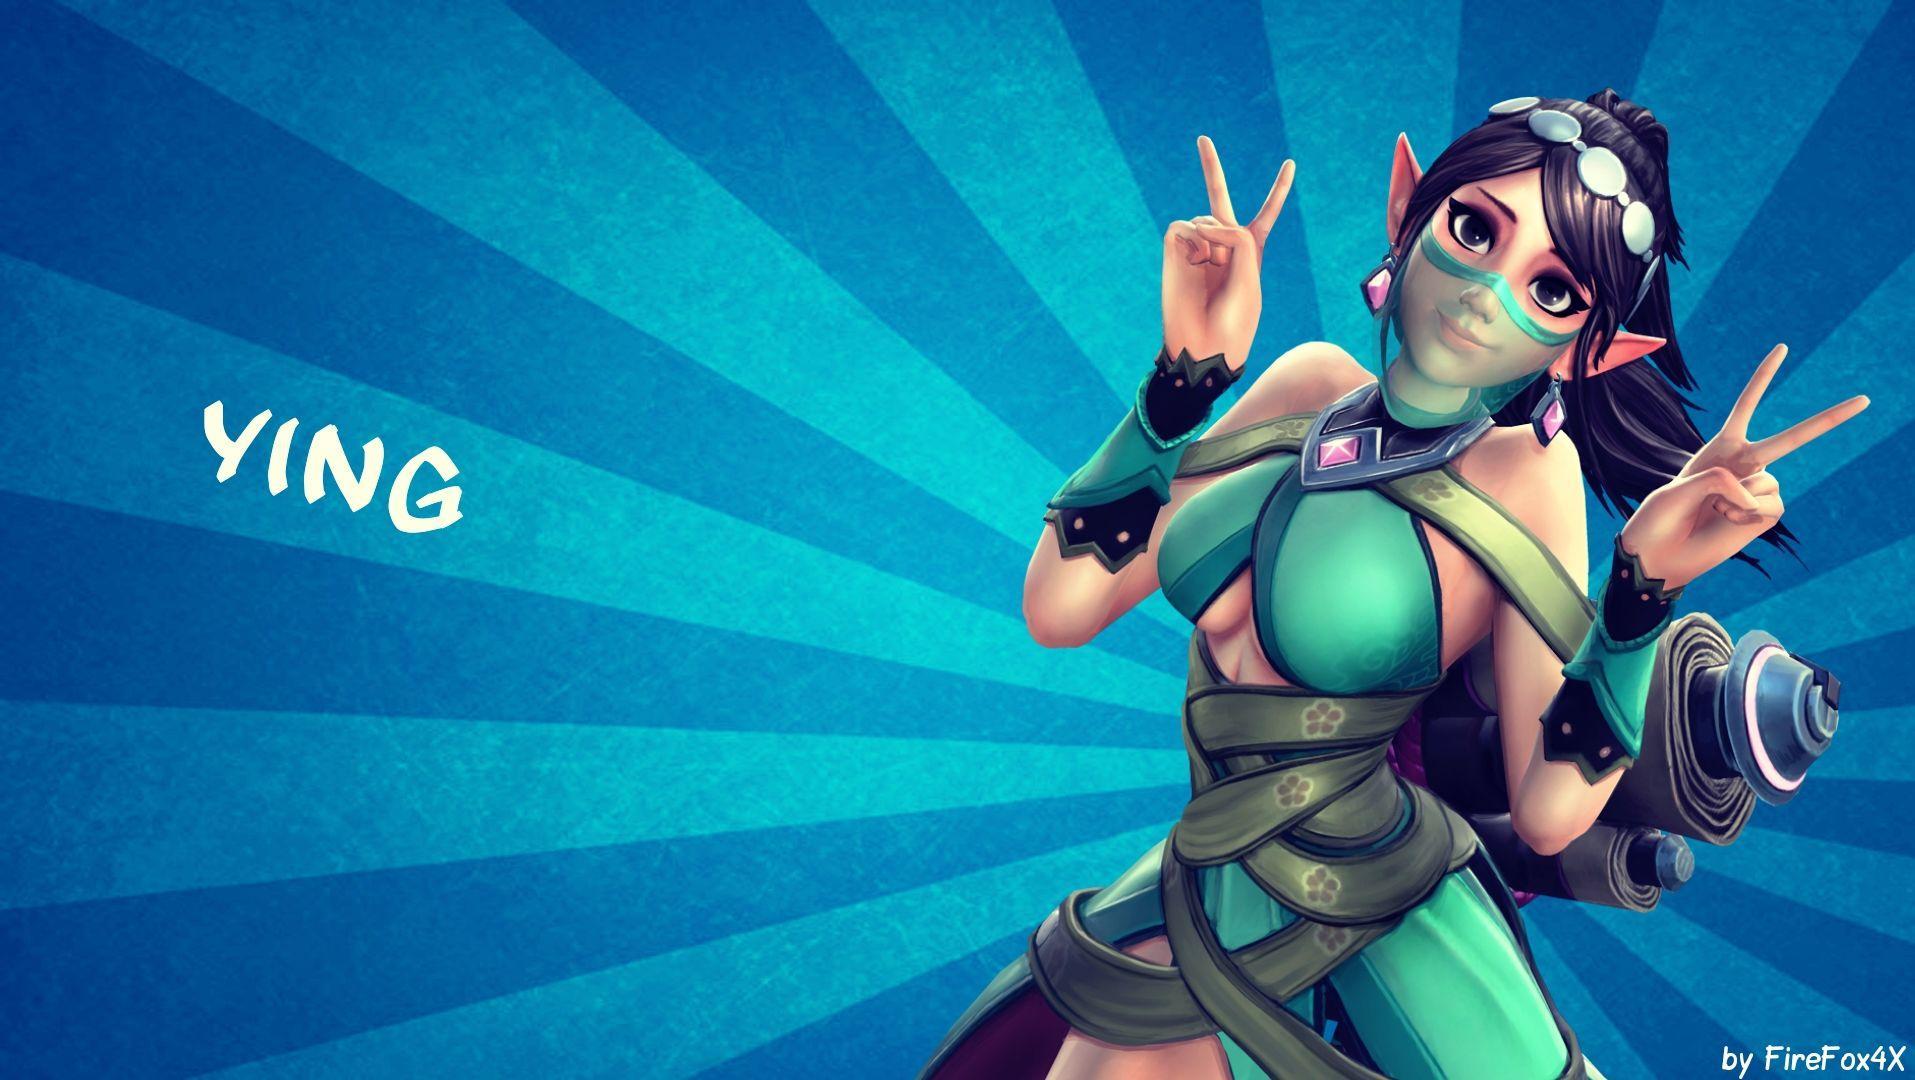 Paladins Ying wallpapers by FireFox4X